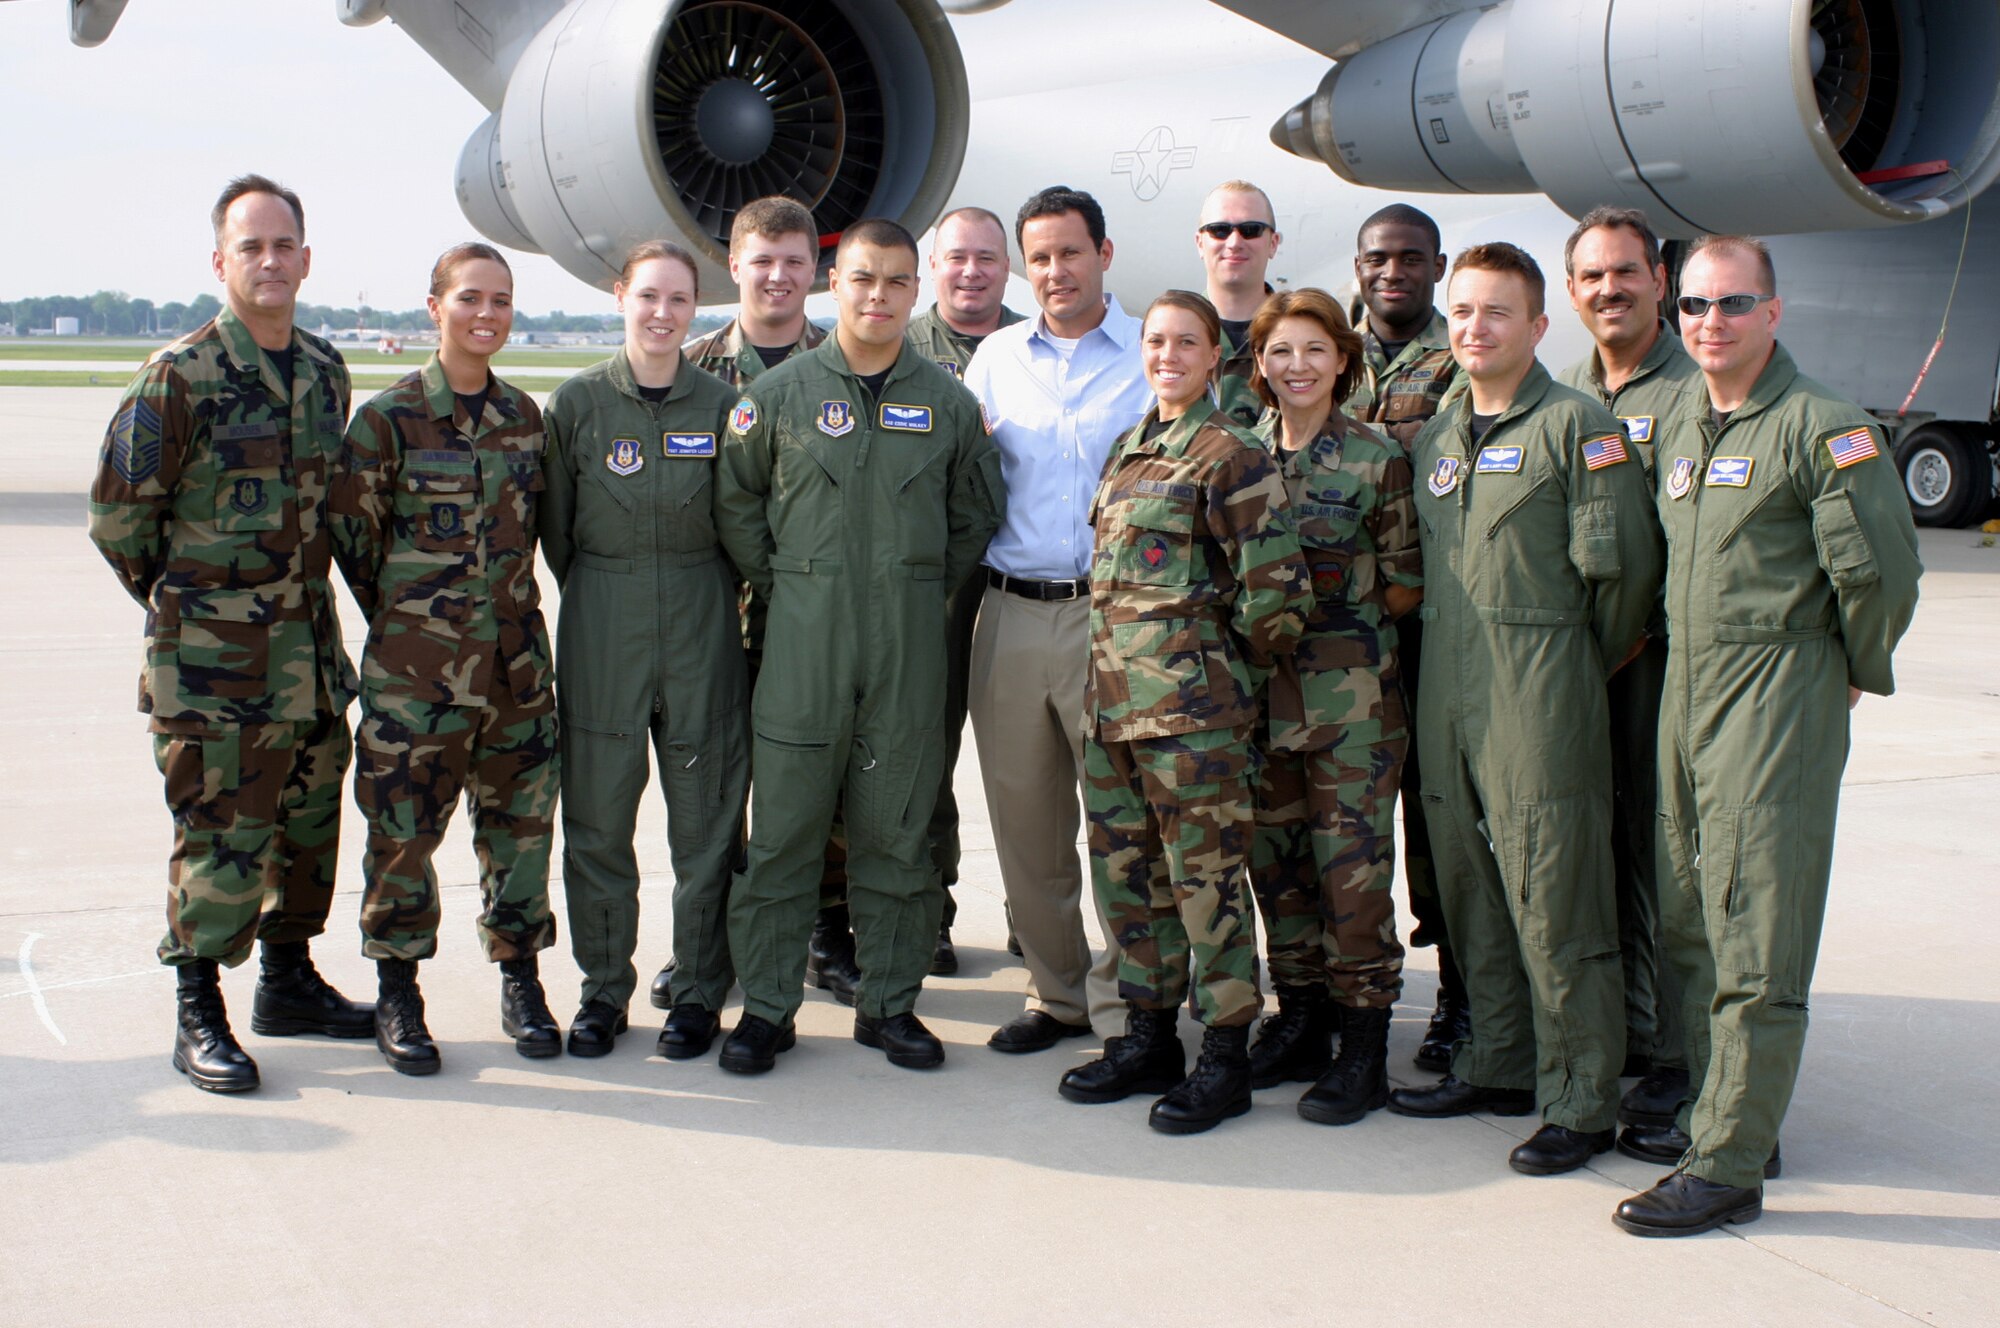 WRIGHT-PATTERSON AFB, Ohio – Air Force reservists from the 445th Airlift Wing has their photo taken with Brian Kilmeade (center) just after the live broadcast of "FOX and Friends" on June 8.  The show was broadcast from the base’s west ramp which is home to the wing’s C-5 Galaxy aircraft. (U.S. Air Force photo by Master Sgt. Doug Moore)